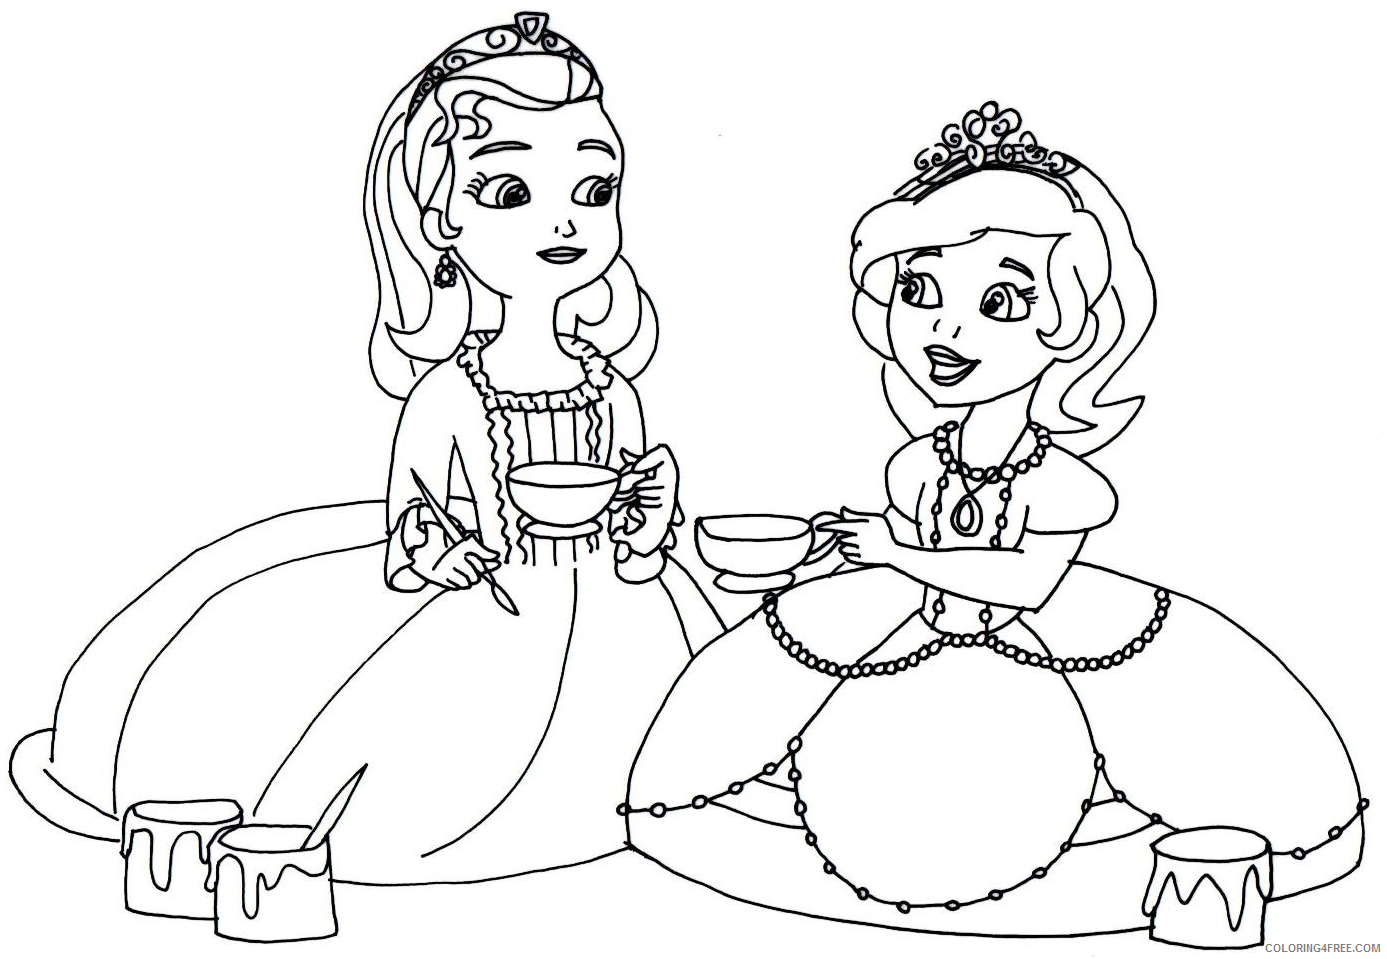 Sofia the First Coloring Pages Cartoons Sofia the First and Amber Printable 2020 5858 Coloring4free